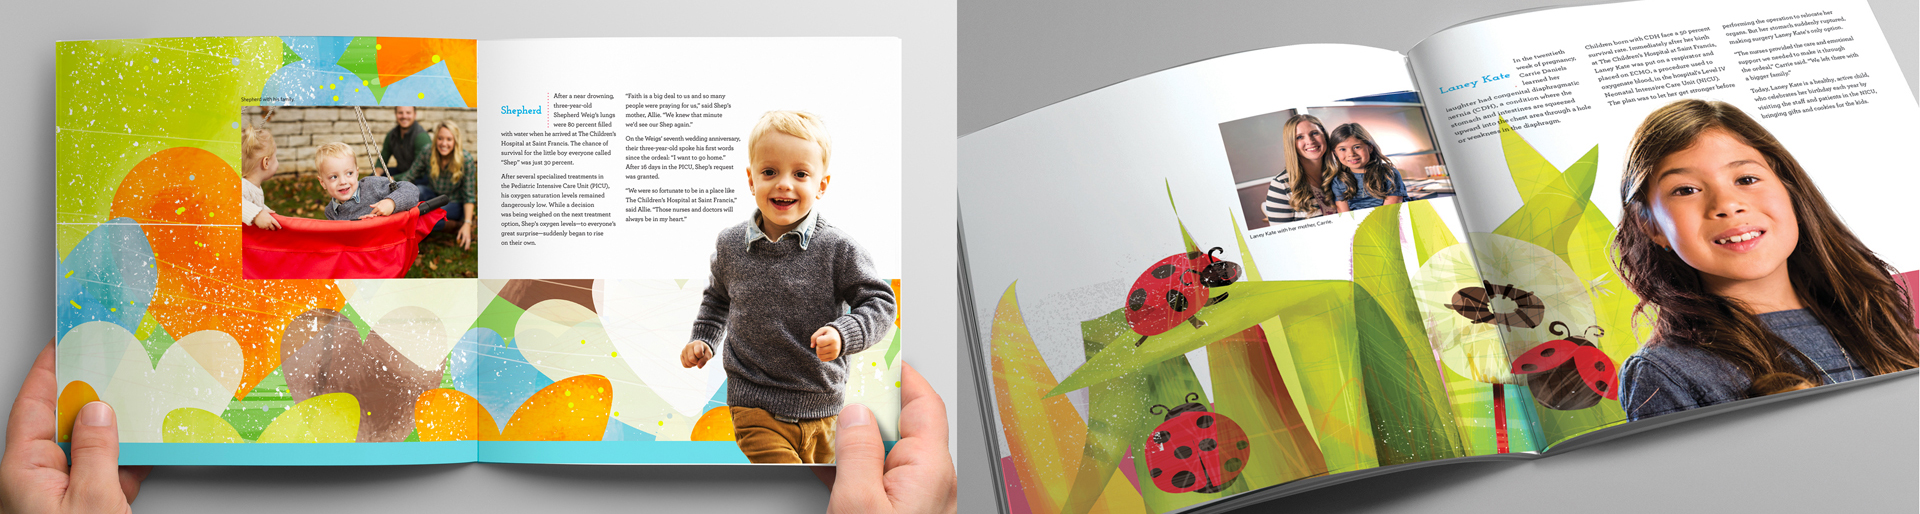 The interior pages of a children's book for Saint Francis Health System designed by AcrobatAnt.